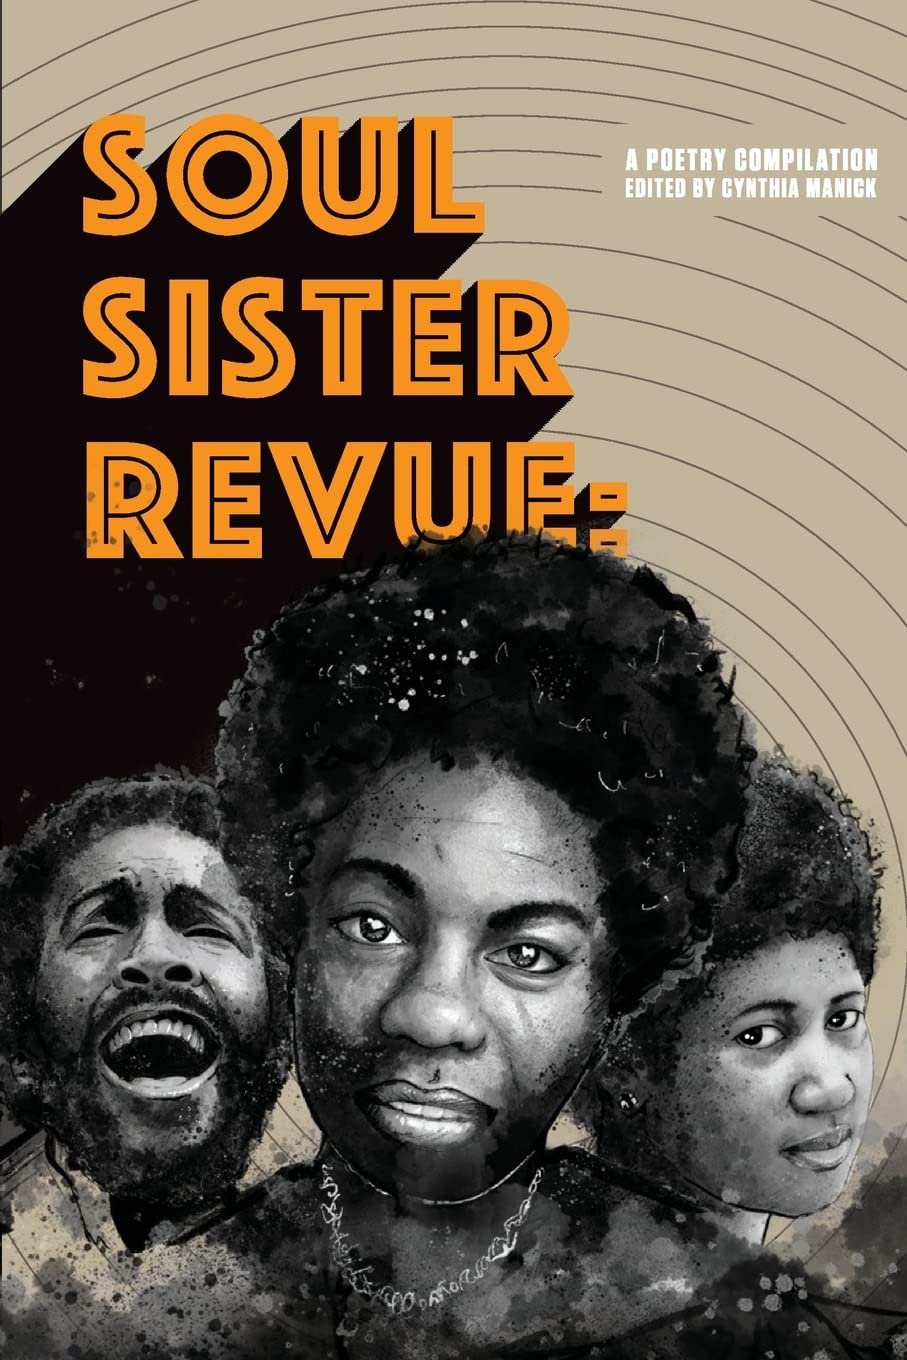 SOUL SISTER REVUE: A POETRY COMPILATION (JAMII PUBLISHING, 2019)